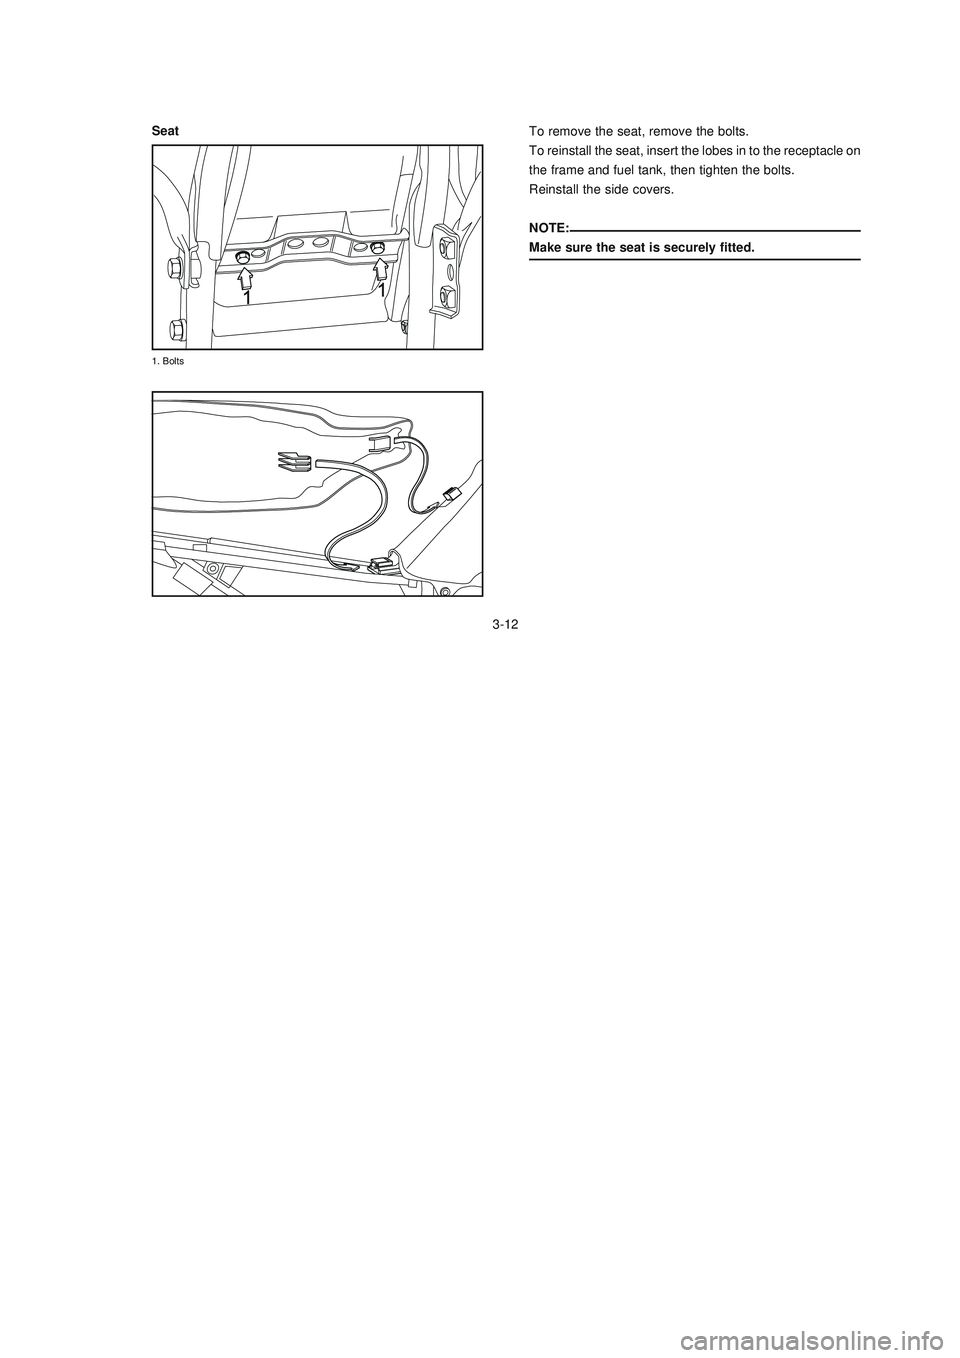 YAMAHA XTZ125 2008  Owners Manual 3-12
3-12
To remove the seat, remove the bolts.
To reinstall the seat, insert the lobes in to the receptacle on
the frame and fuel tank, then tighten the bolts.
Reinstall the side covers.
NOTE:
Make s